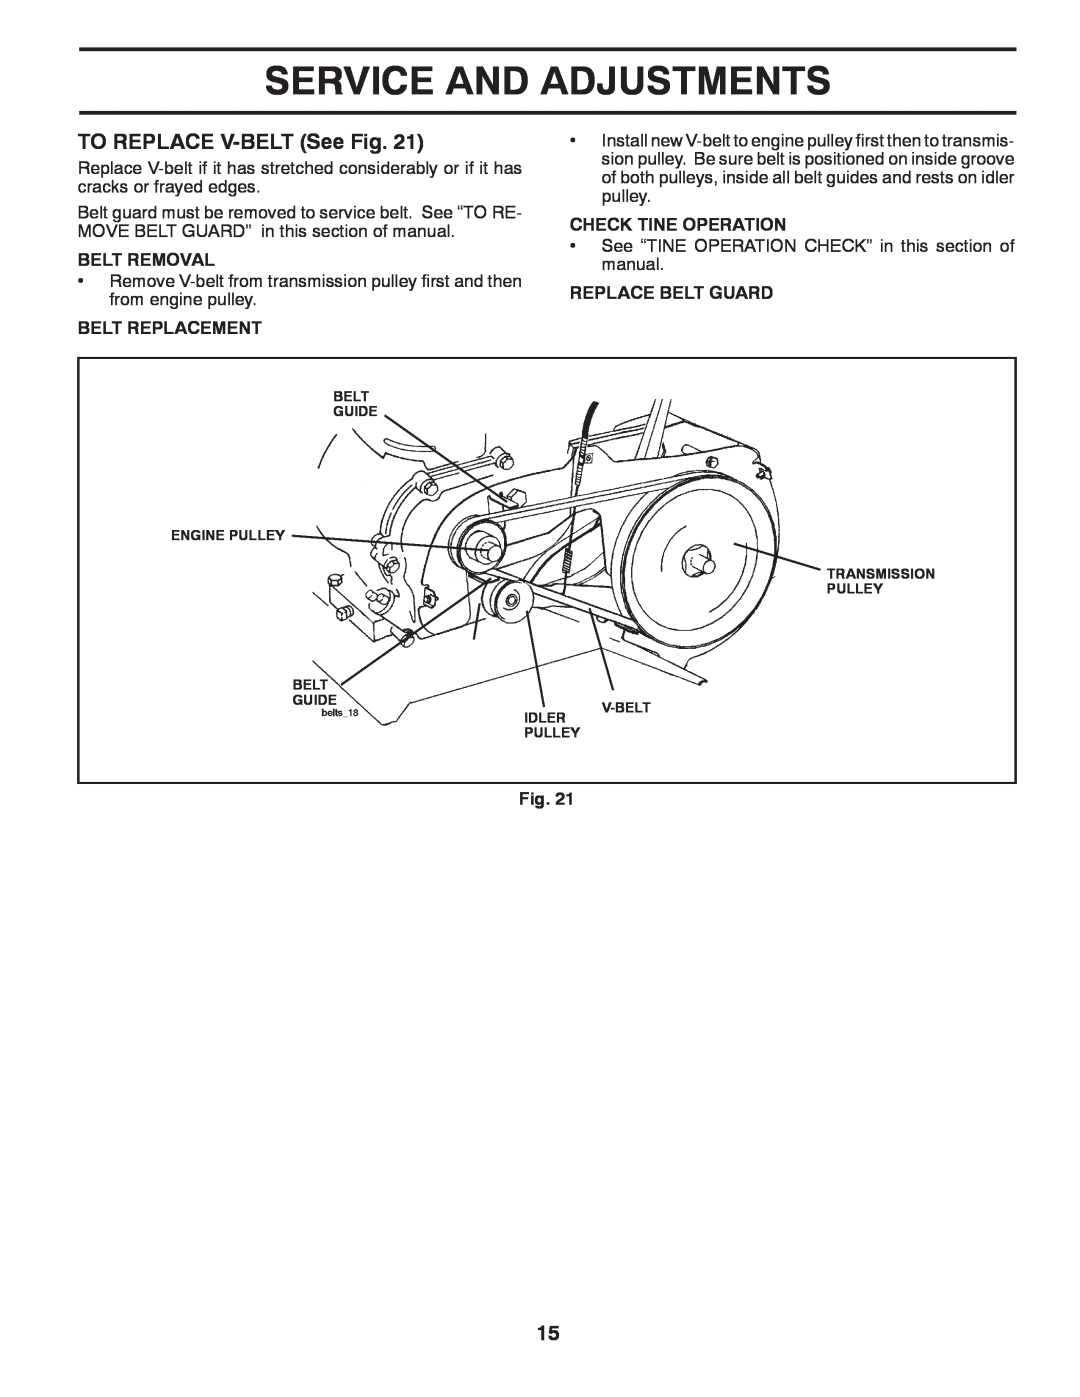 Poulan HDF900 manual TO REPLACE V-BELTSee Fig, Belt Removal, Belt Replacement, Check Tine Operation, Replace Belt Guard 